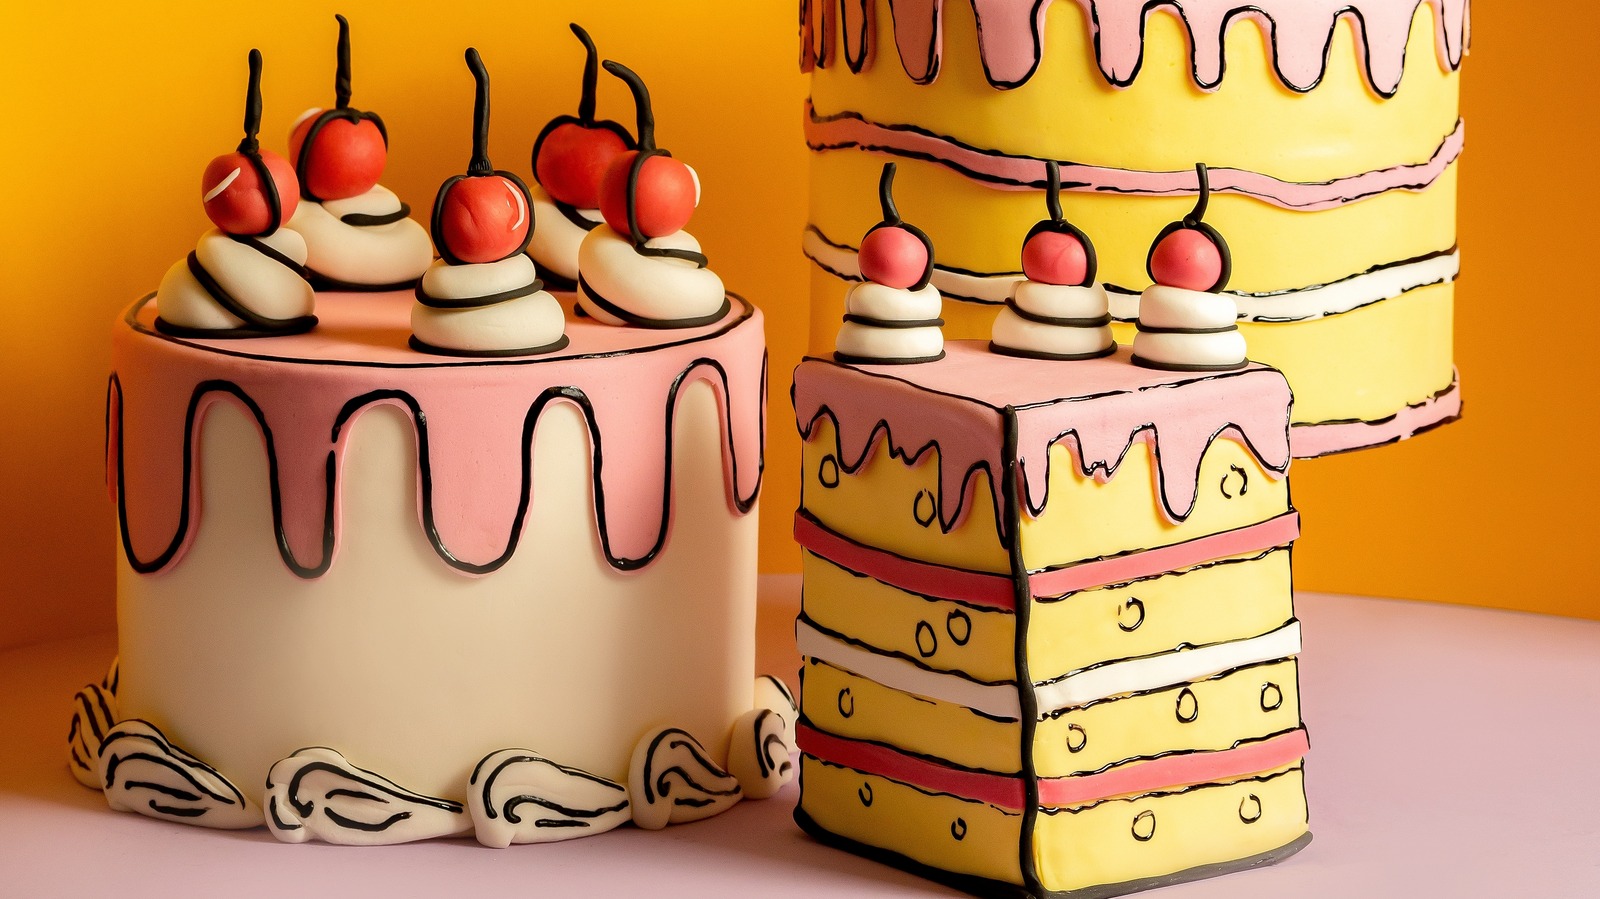 A Birthday Cake That Looks Like a Real Paint Roller!